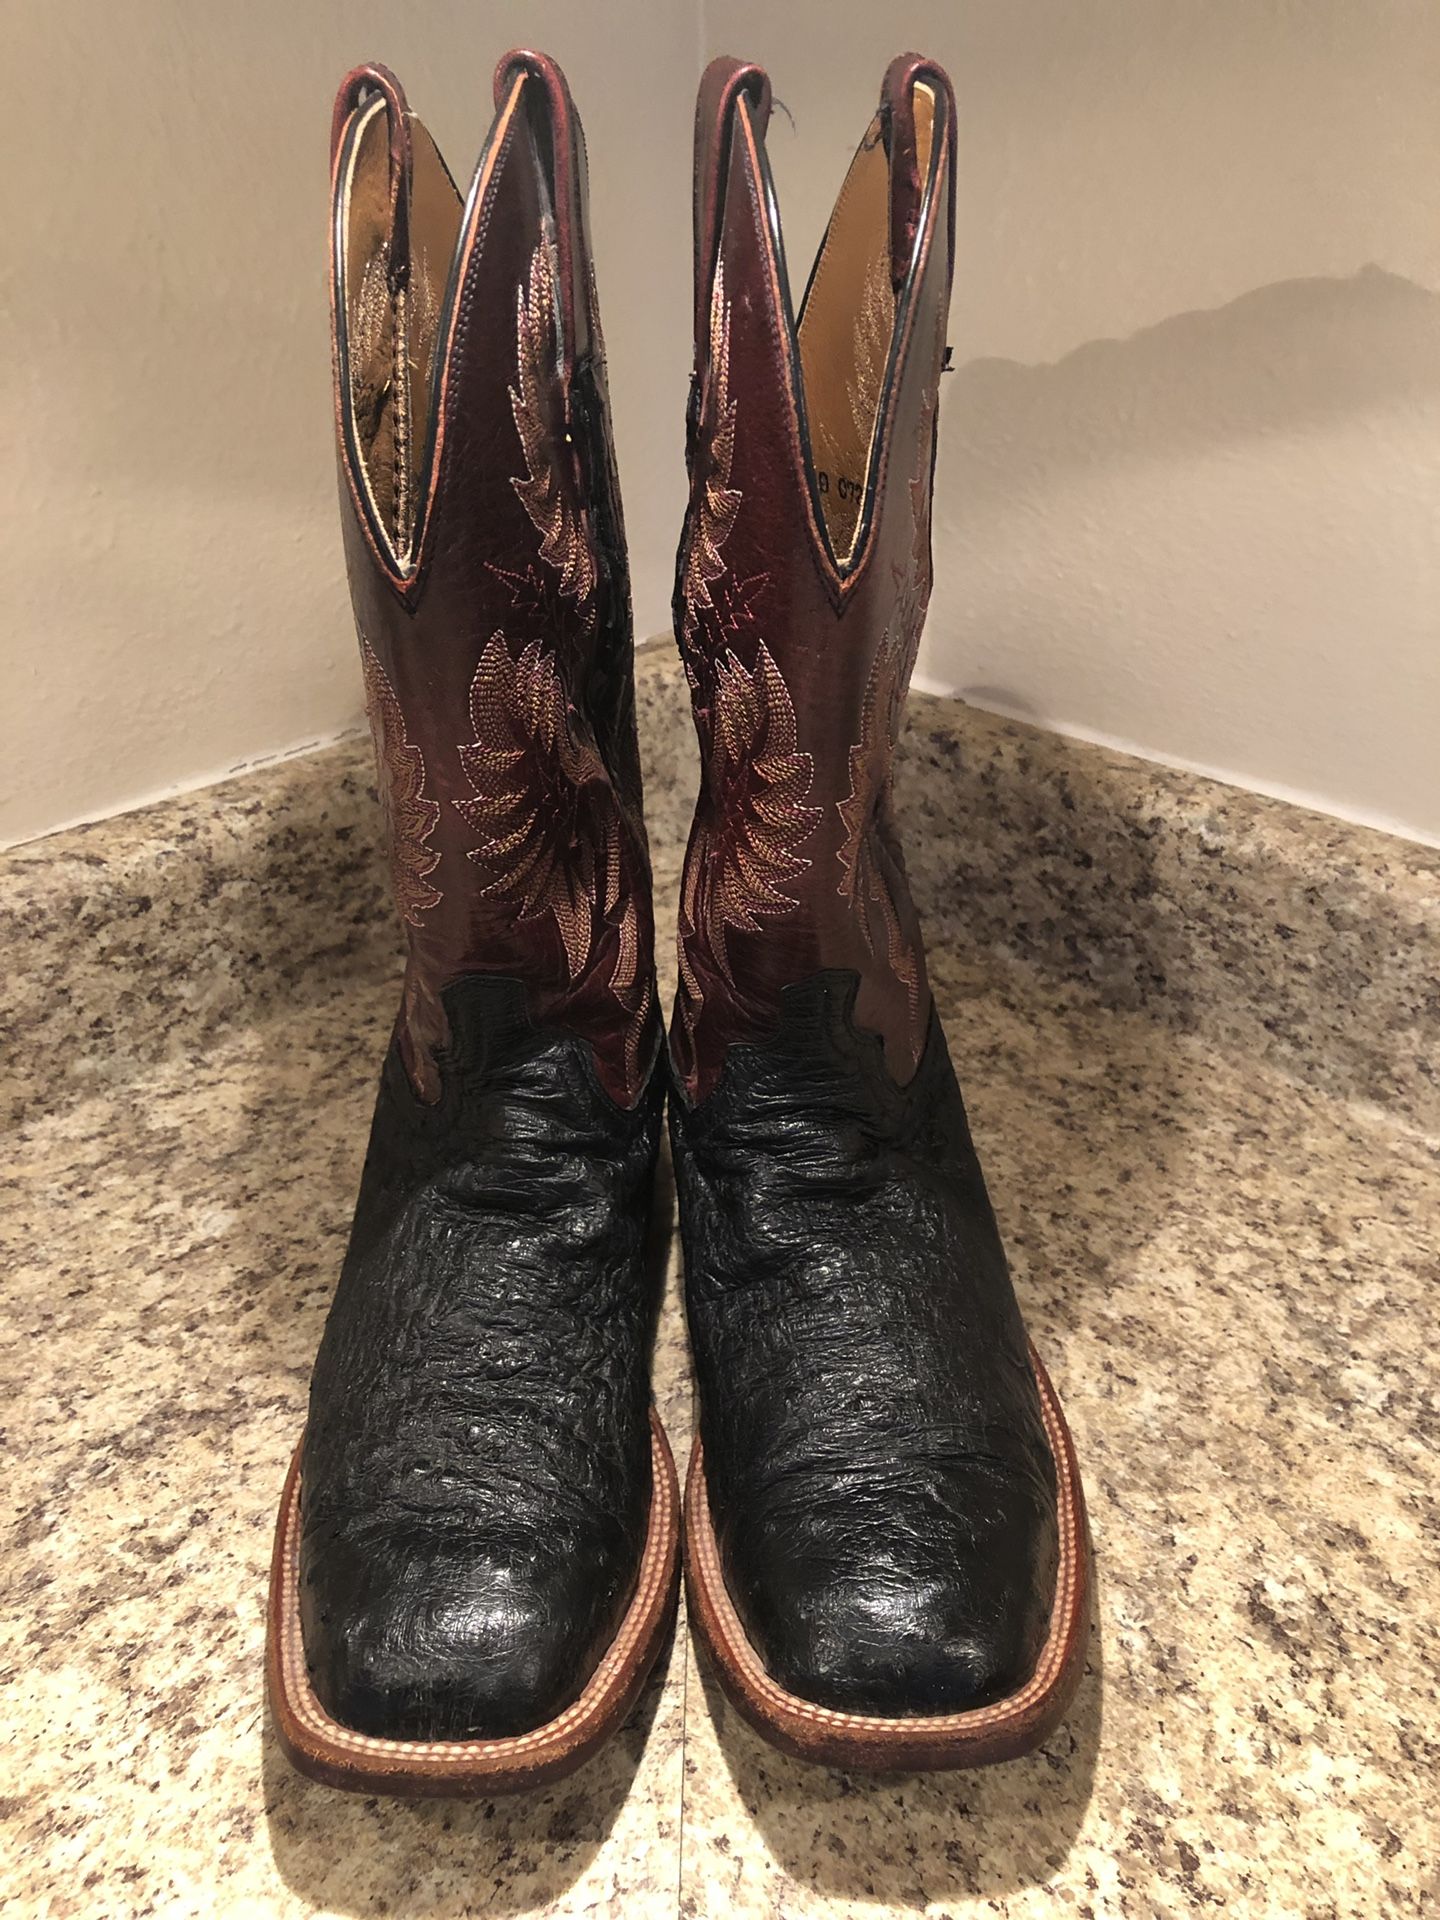 Lucchese men’s boot